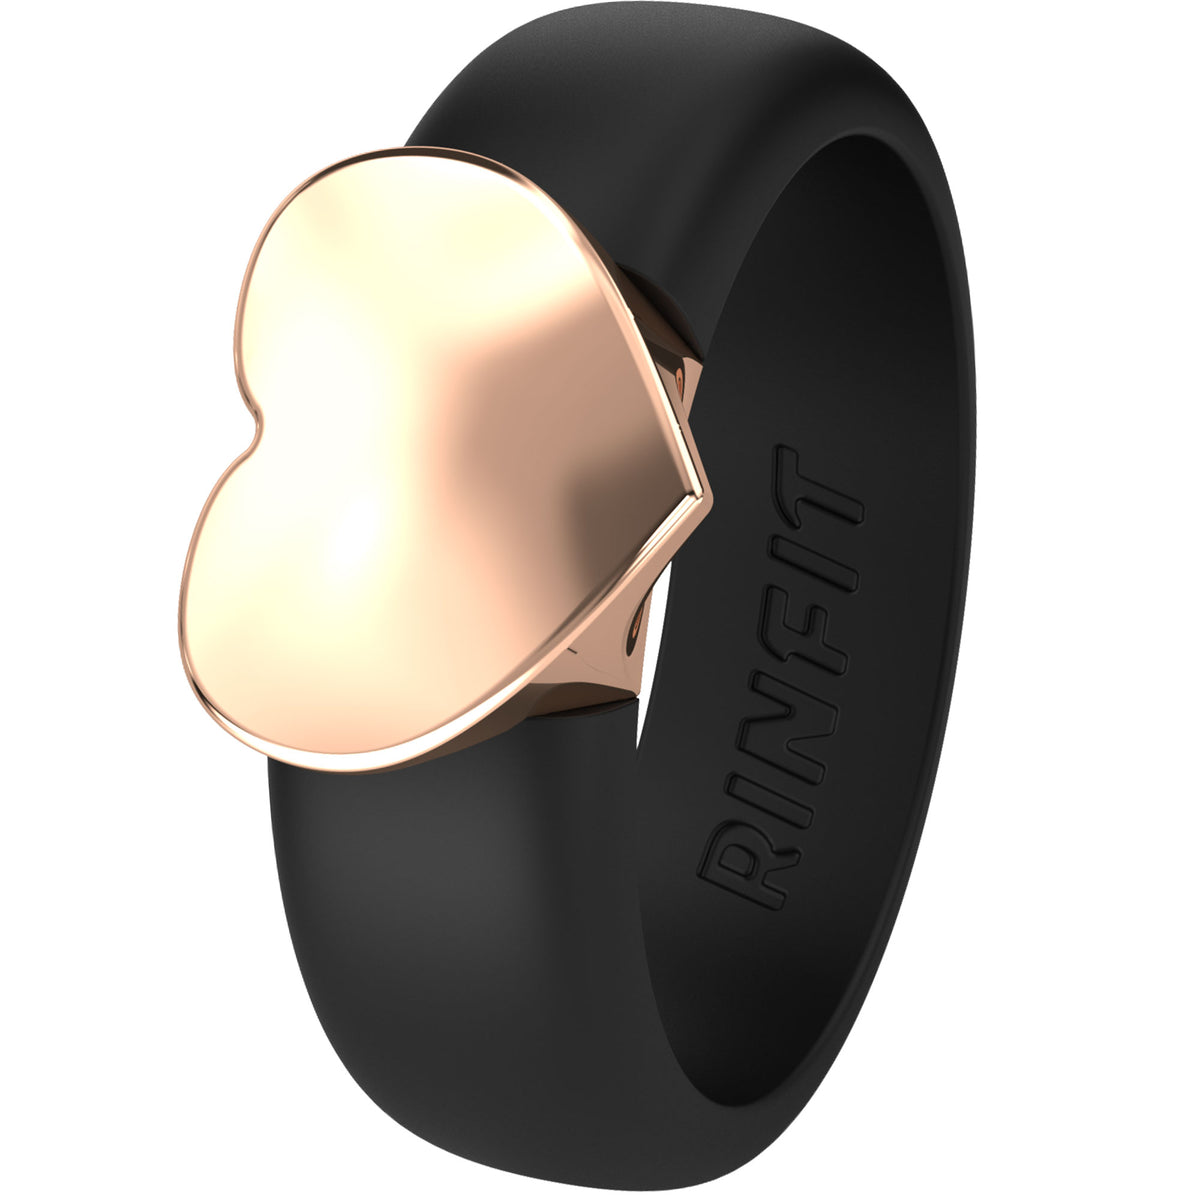 New! Stainless Steel Heart Collection - Silicone Engagement Ring for Women - Heart Collection - U.S. Design Patent Pending